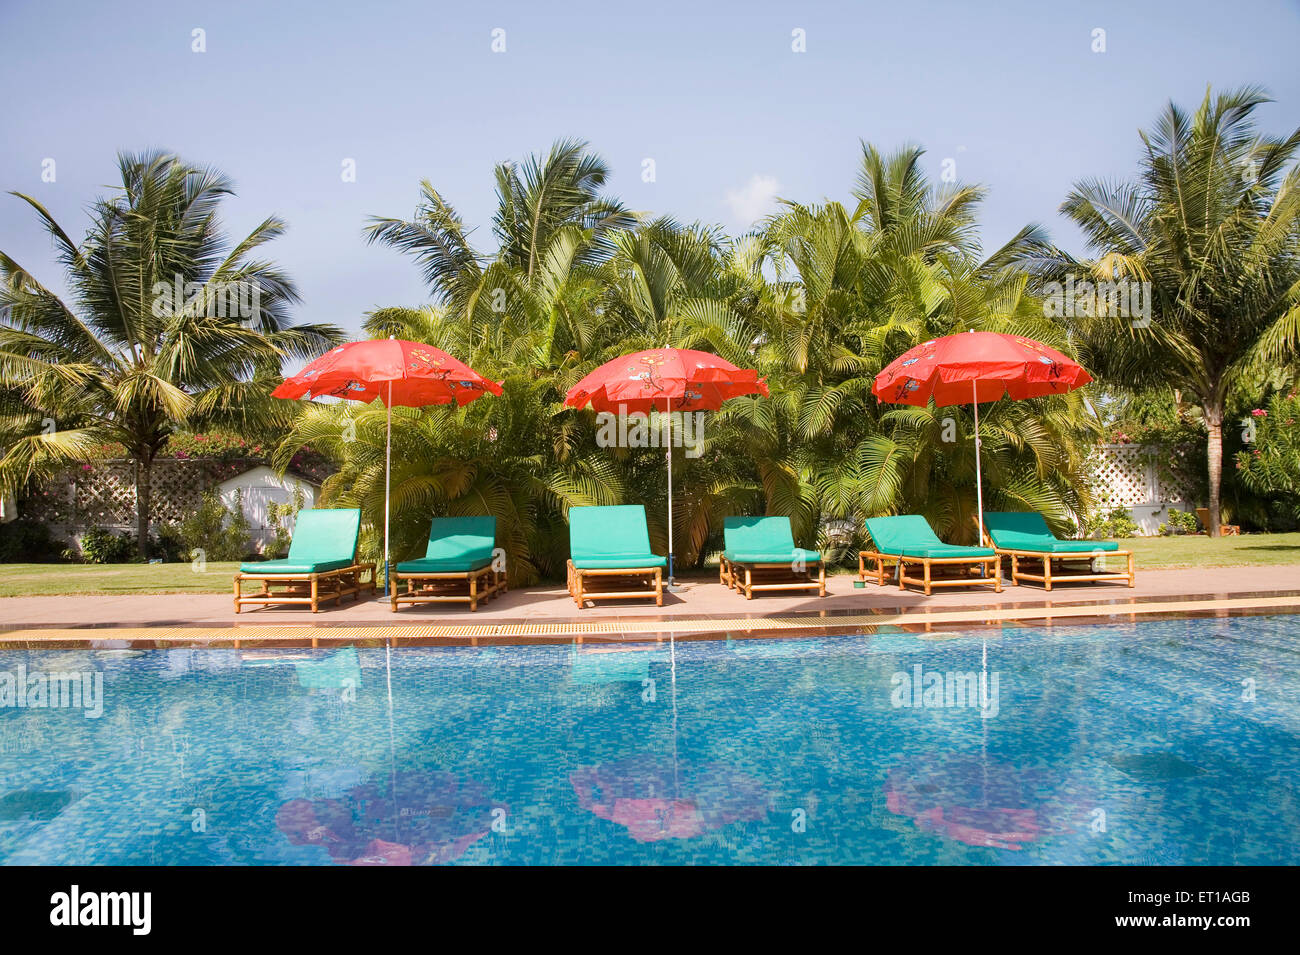 Three red color beach umbrella near the swimming pool blue water green palm trees and blue sky ; Palolem beach ; Goa ; India Stock Photo